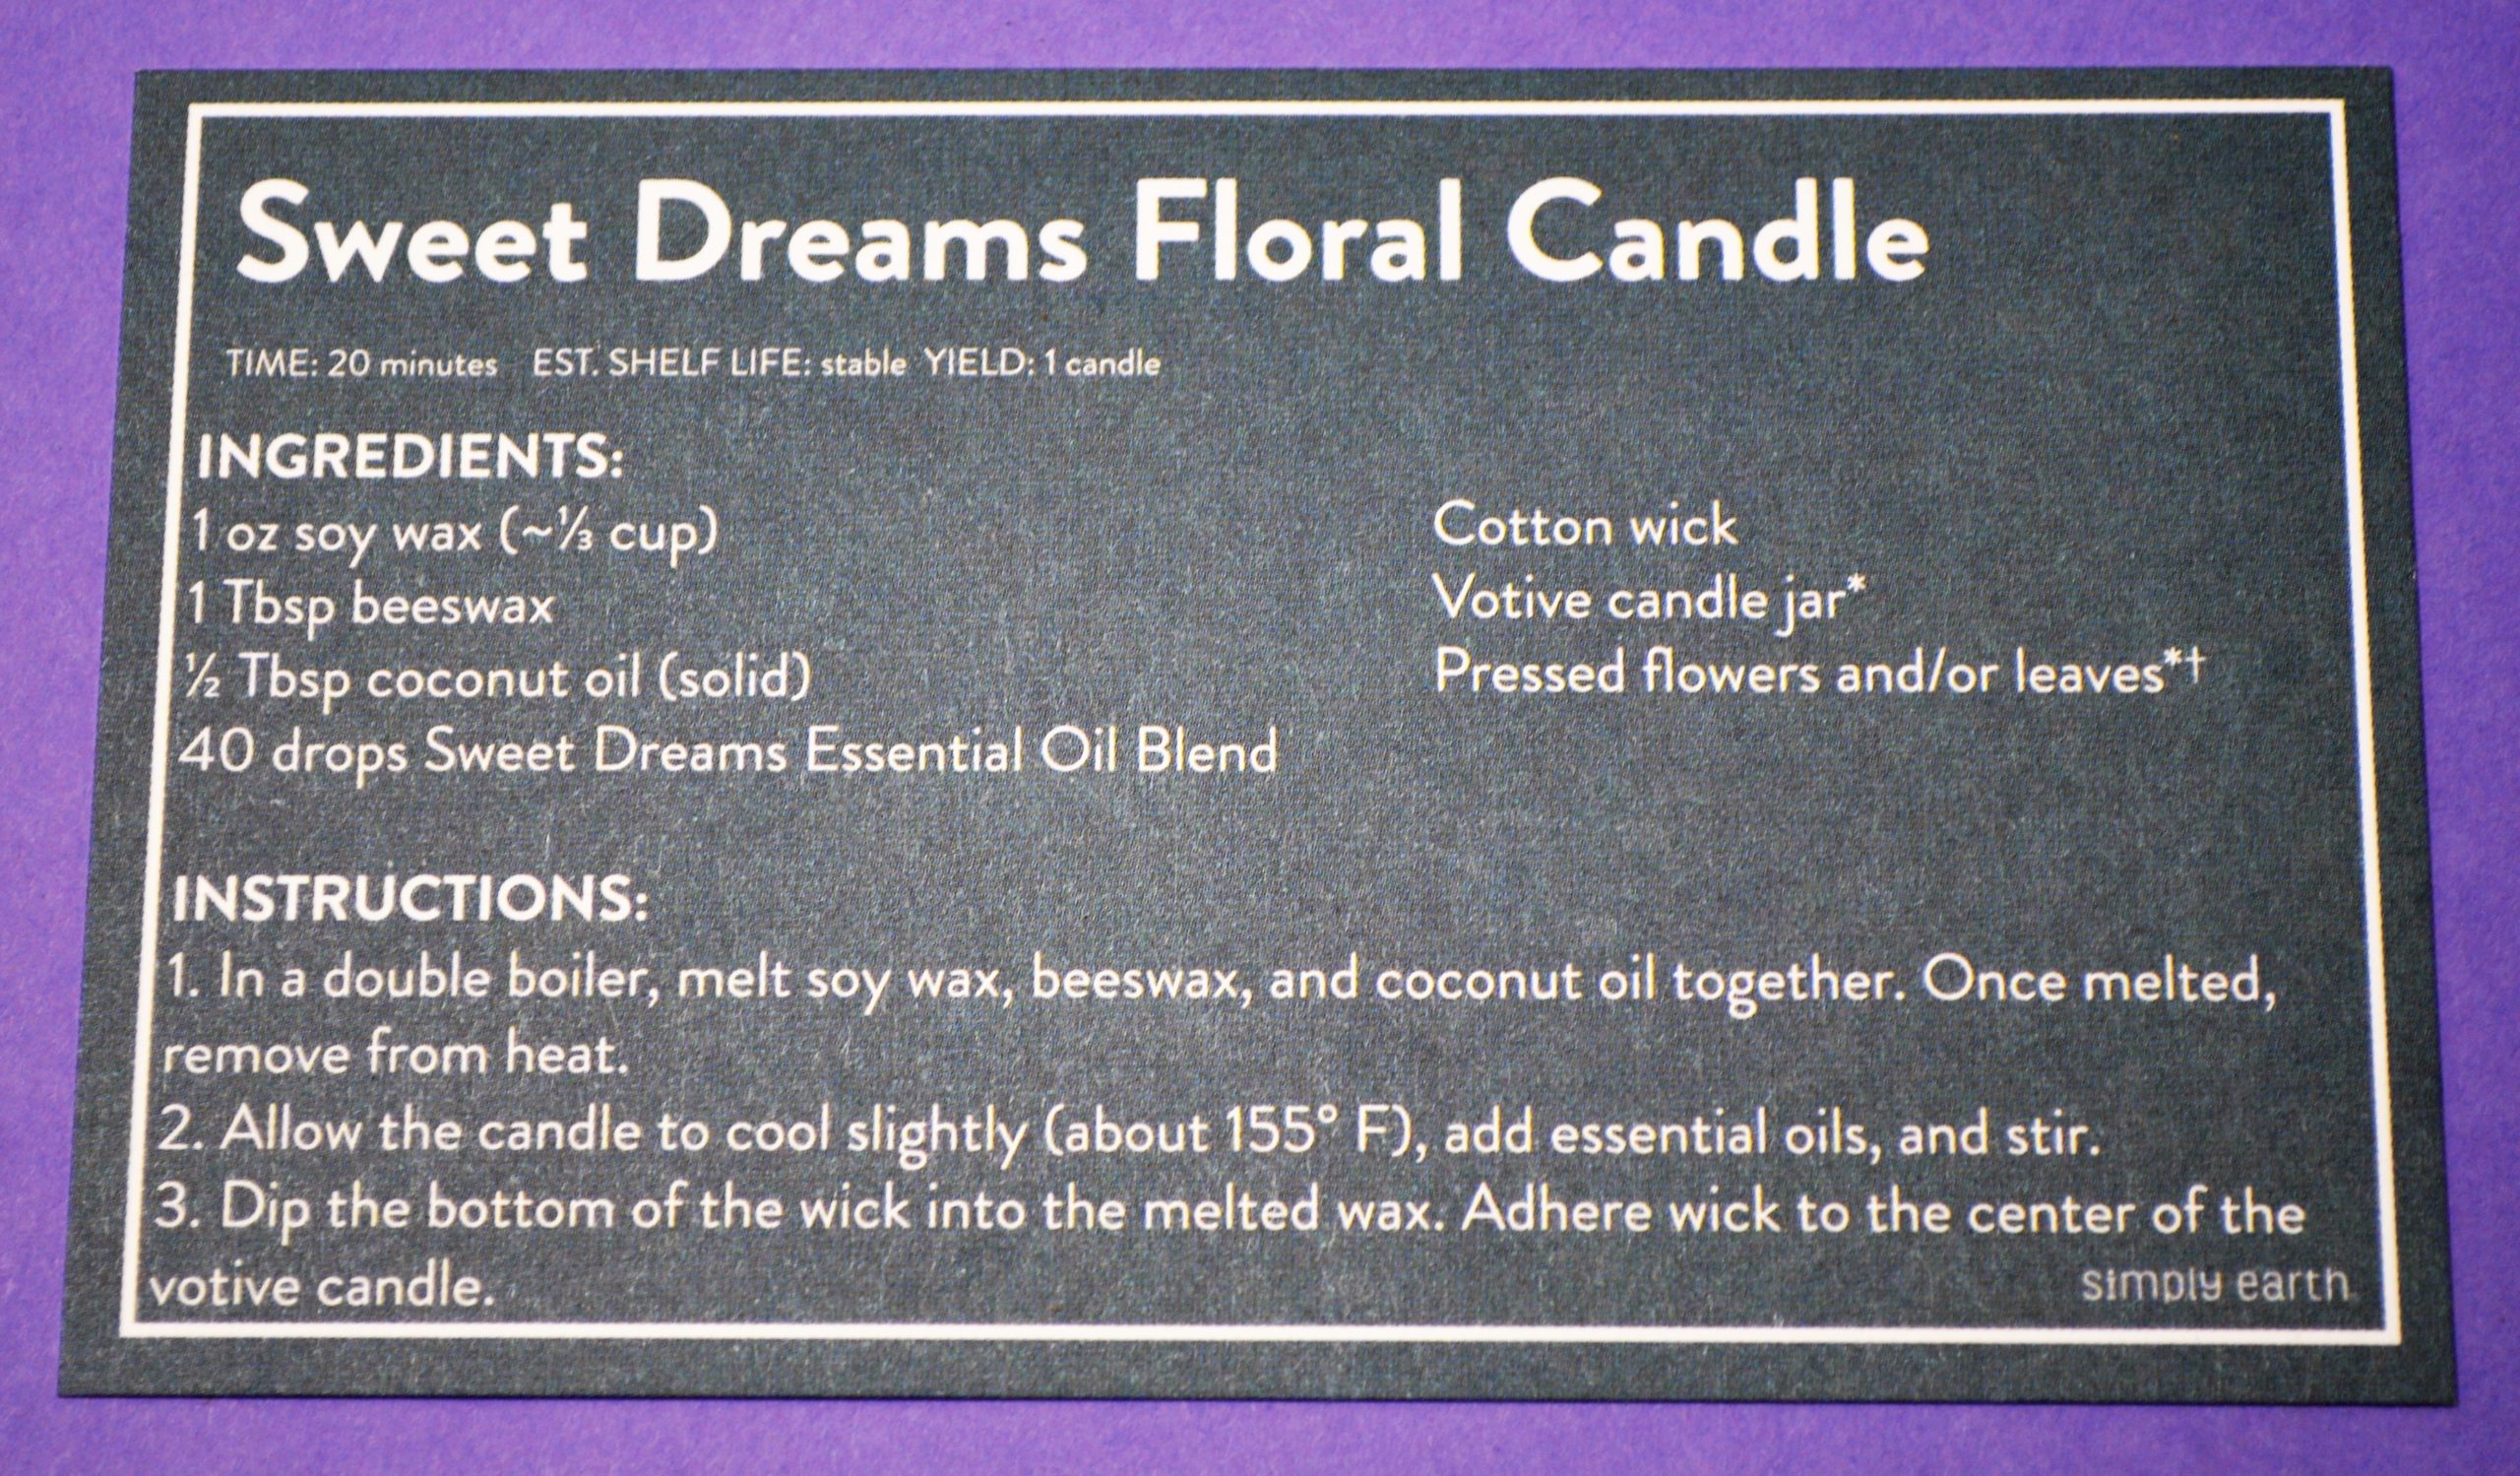 Sweet Dreams Floral Candle Recipe Card